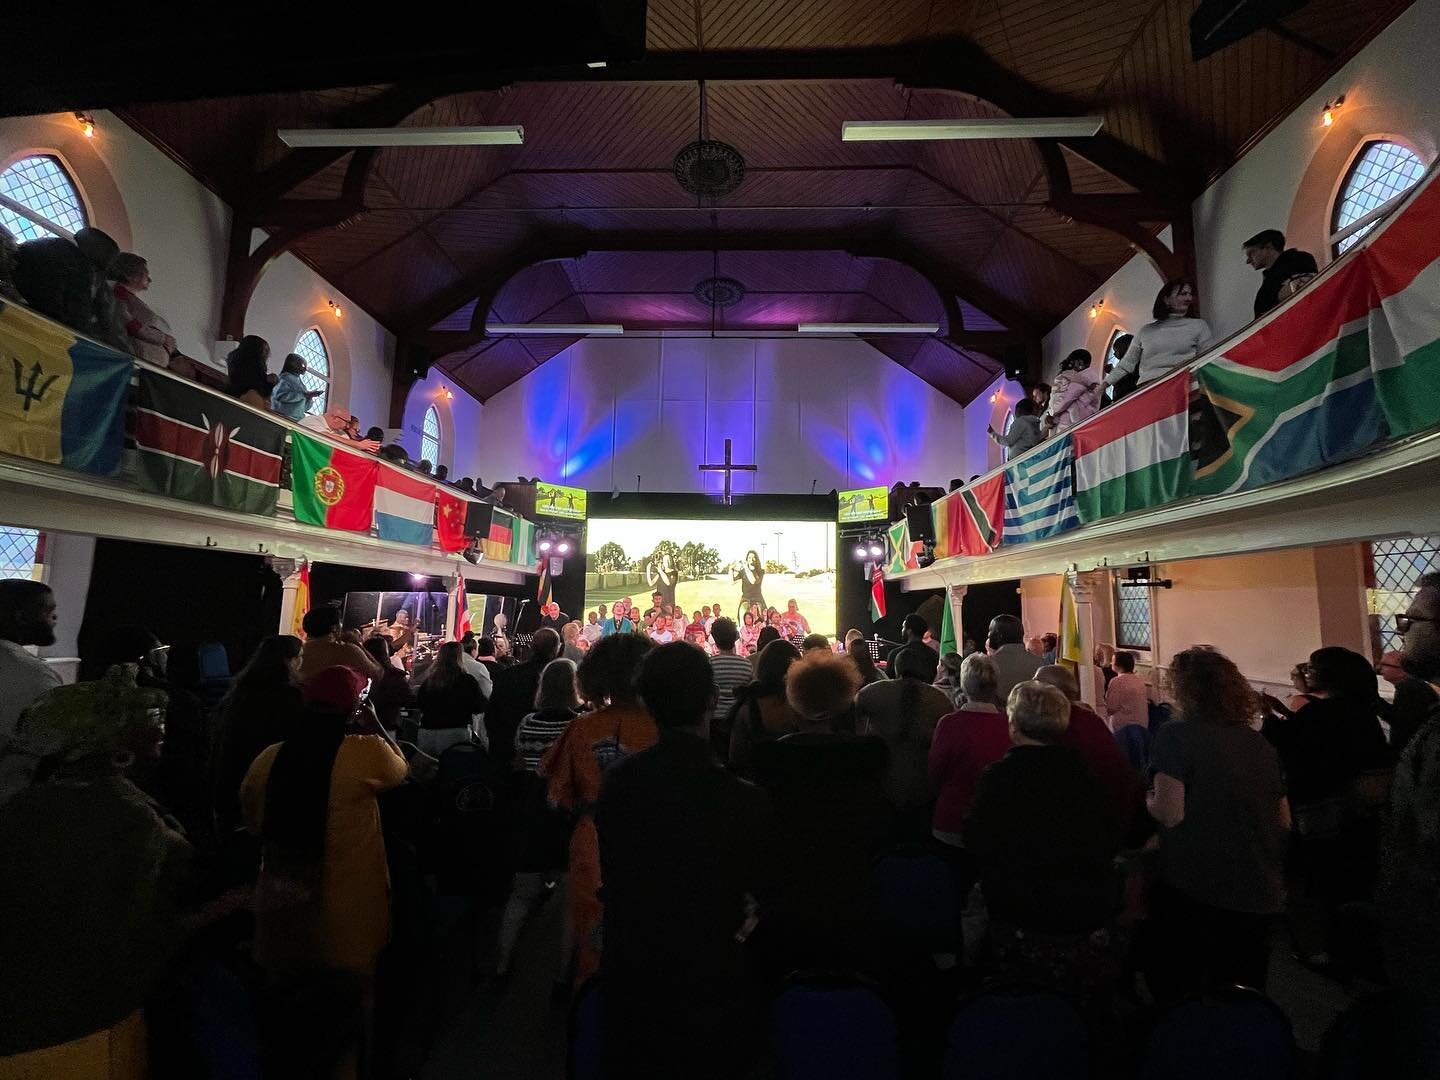 Well what a brilliant International Hallelujah day we had today at both of our services! ⛪️